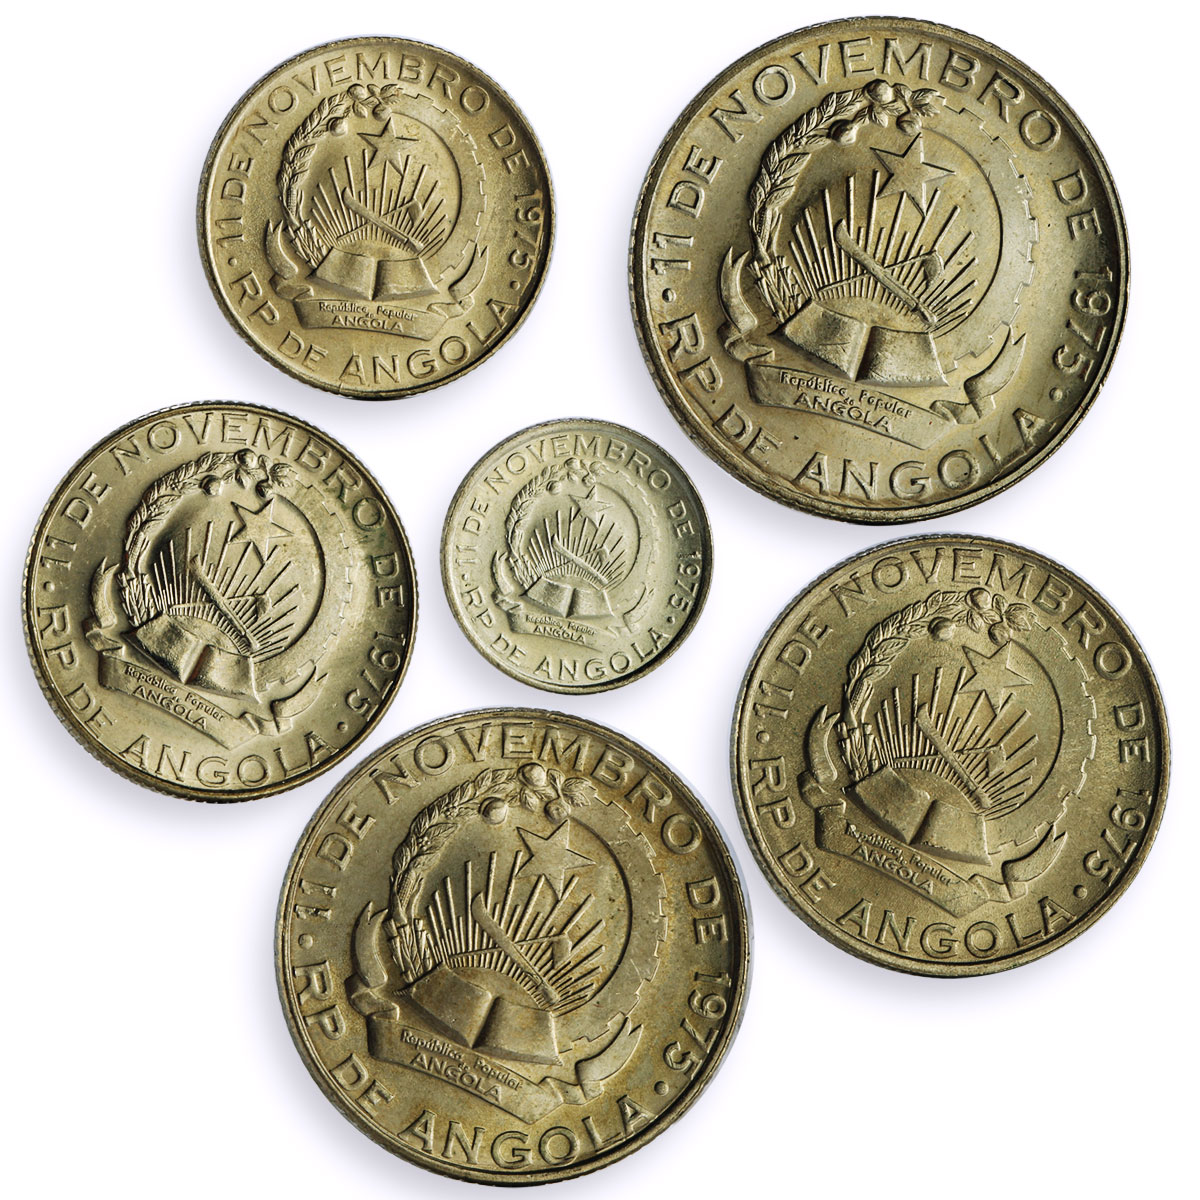 Angola Peoples Republic set of 6 coins Regular Coinage CuNi coins 1975 - 1979